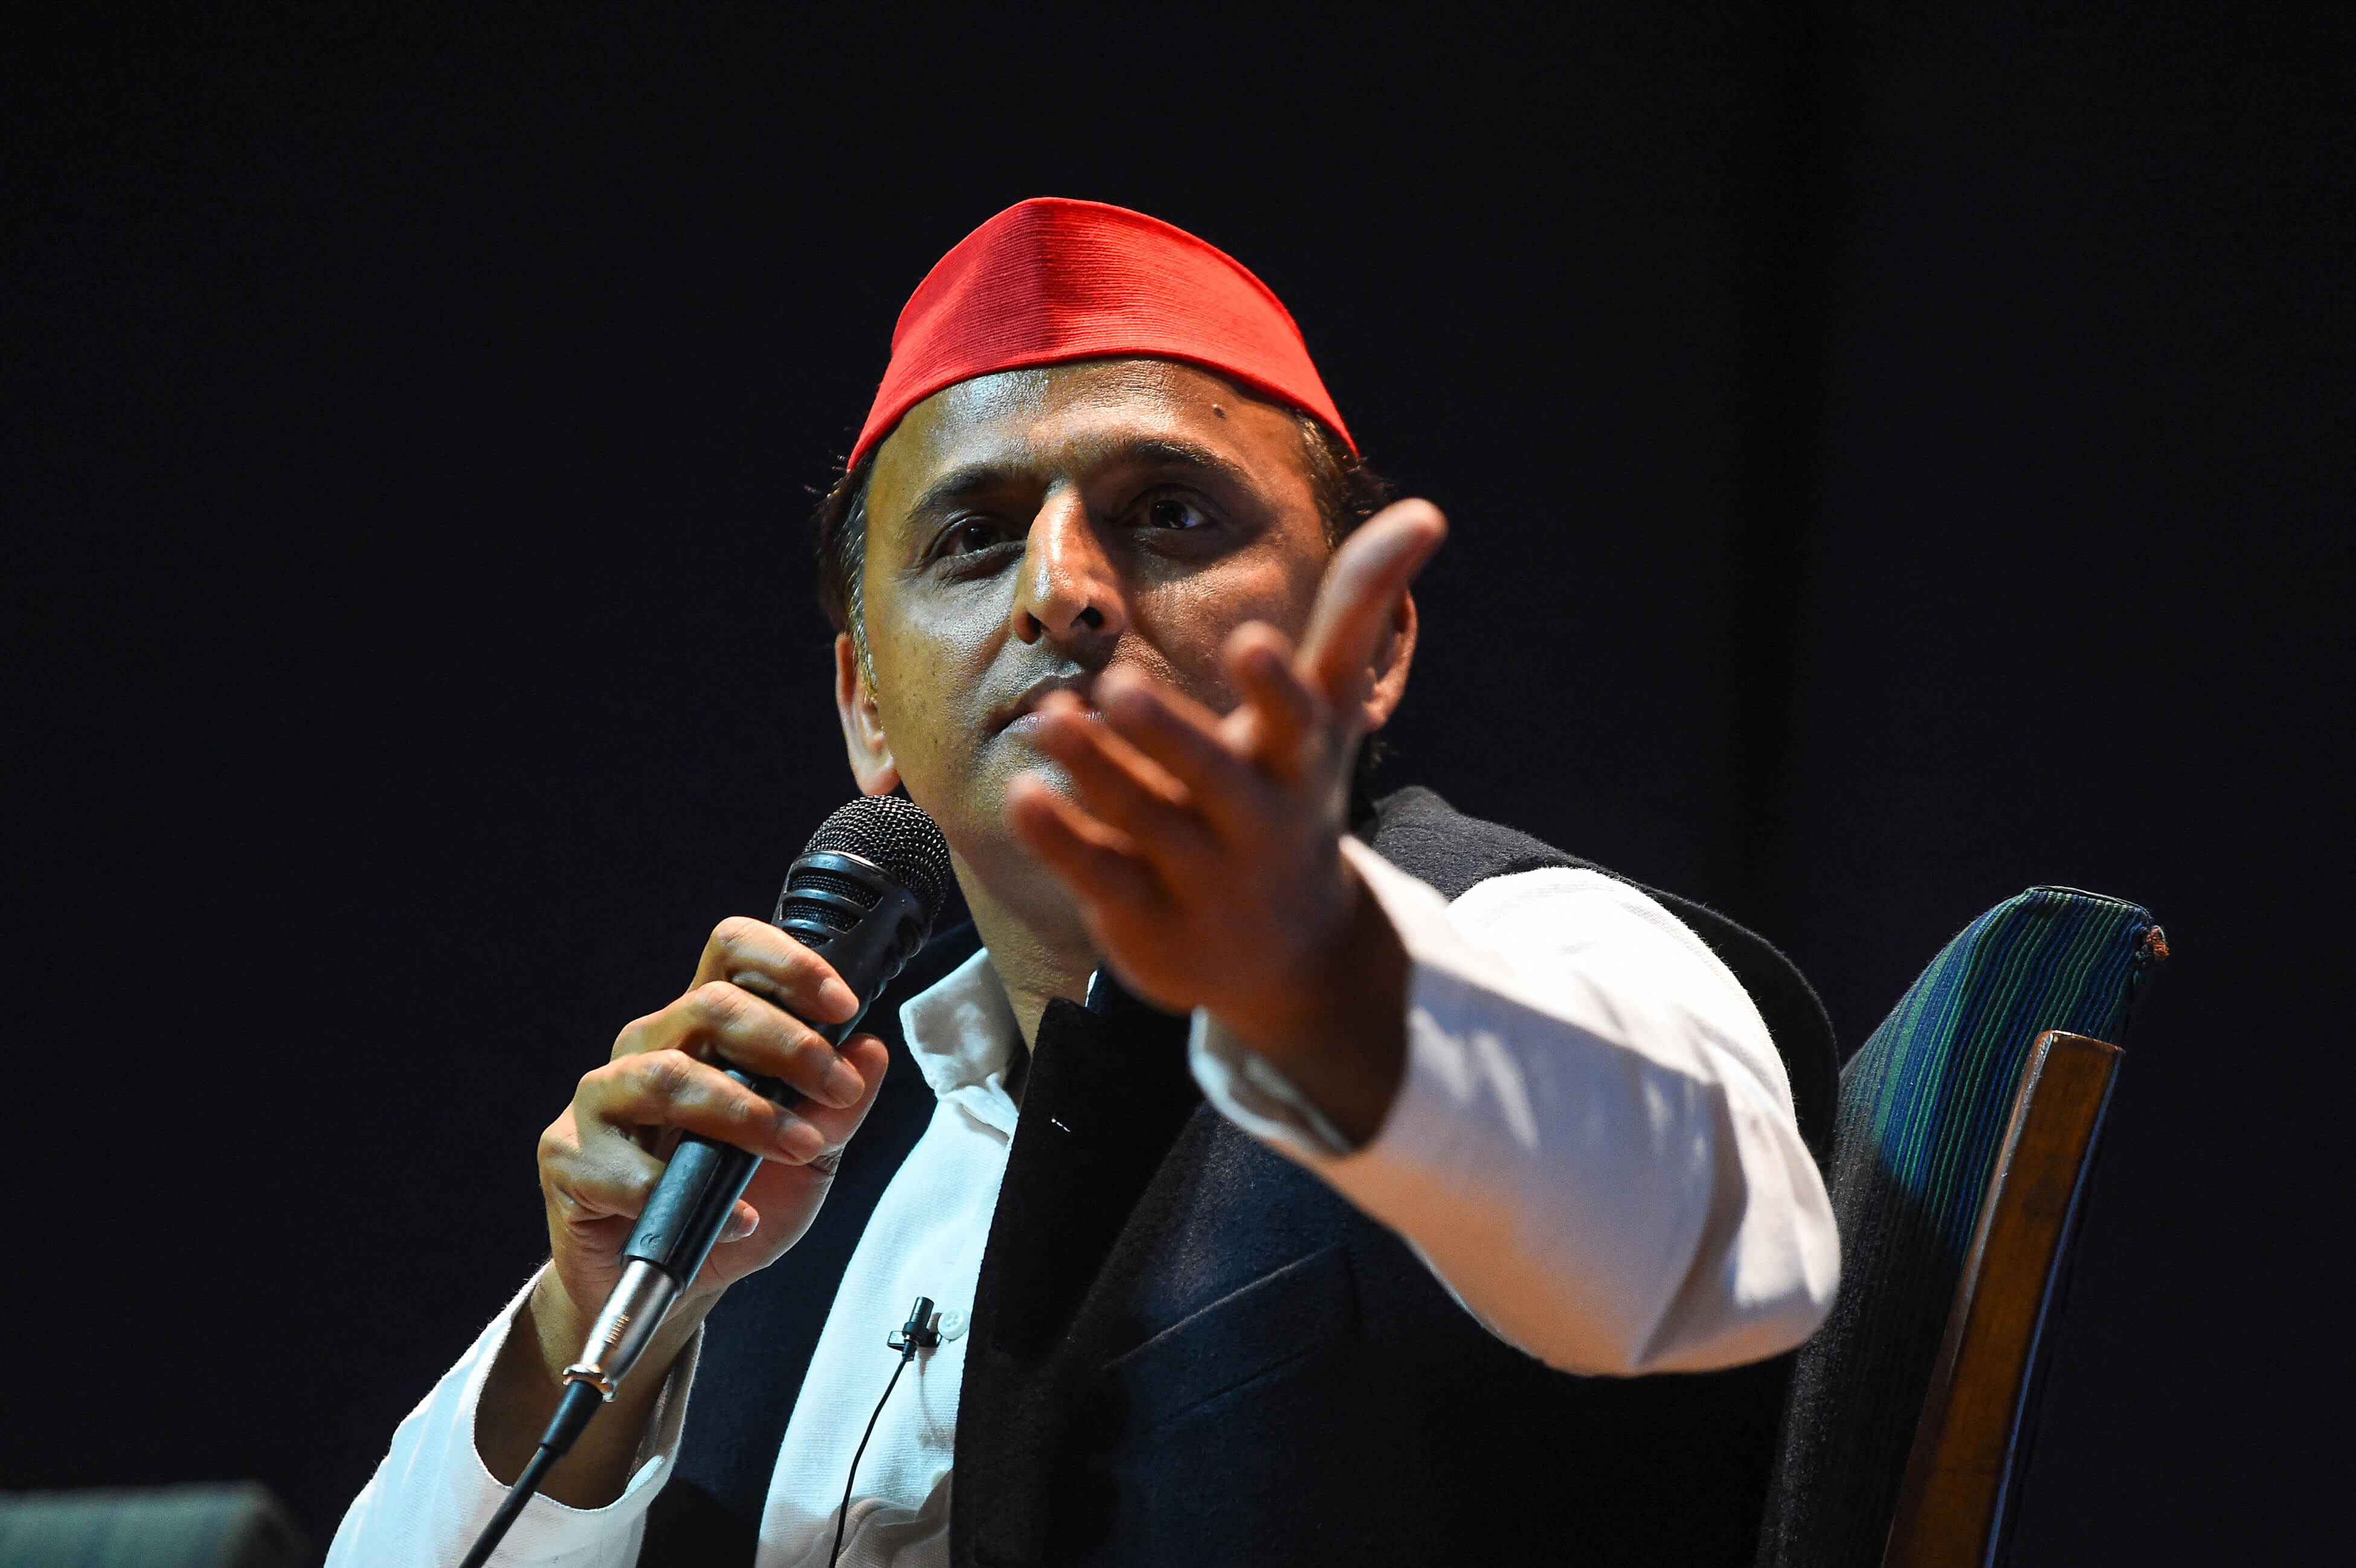 Akhilesh Yadav is one of the Indian politicians who will be contesting in the Indian State Legislative Assembly elections in 2022.